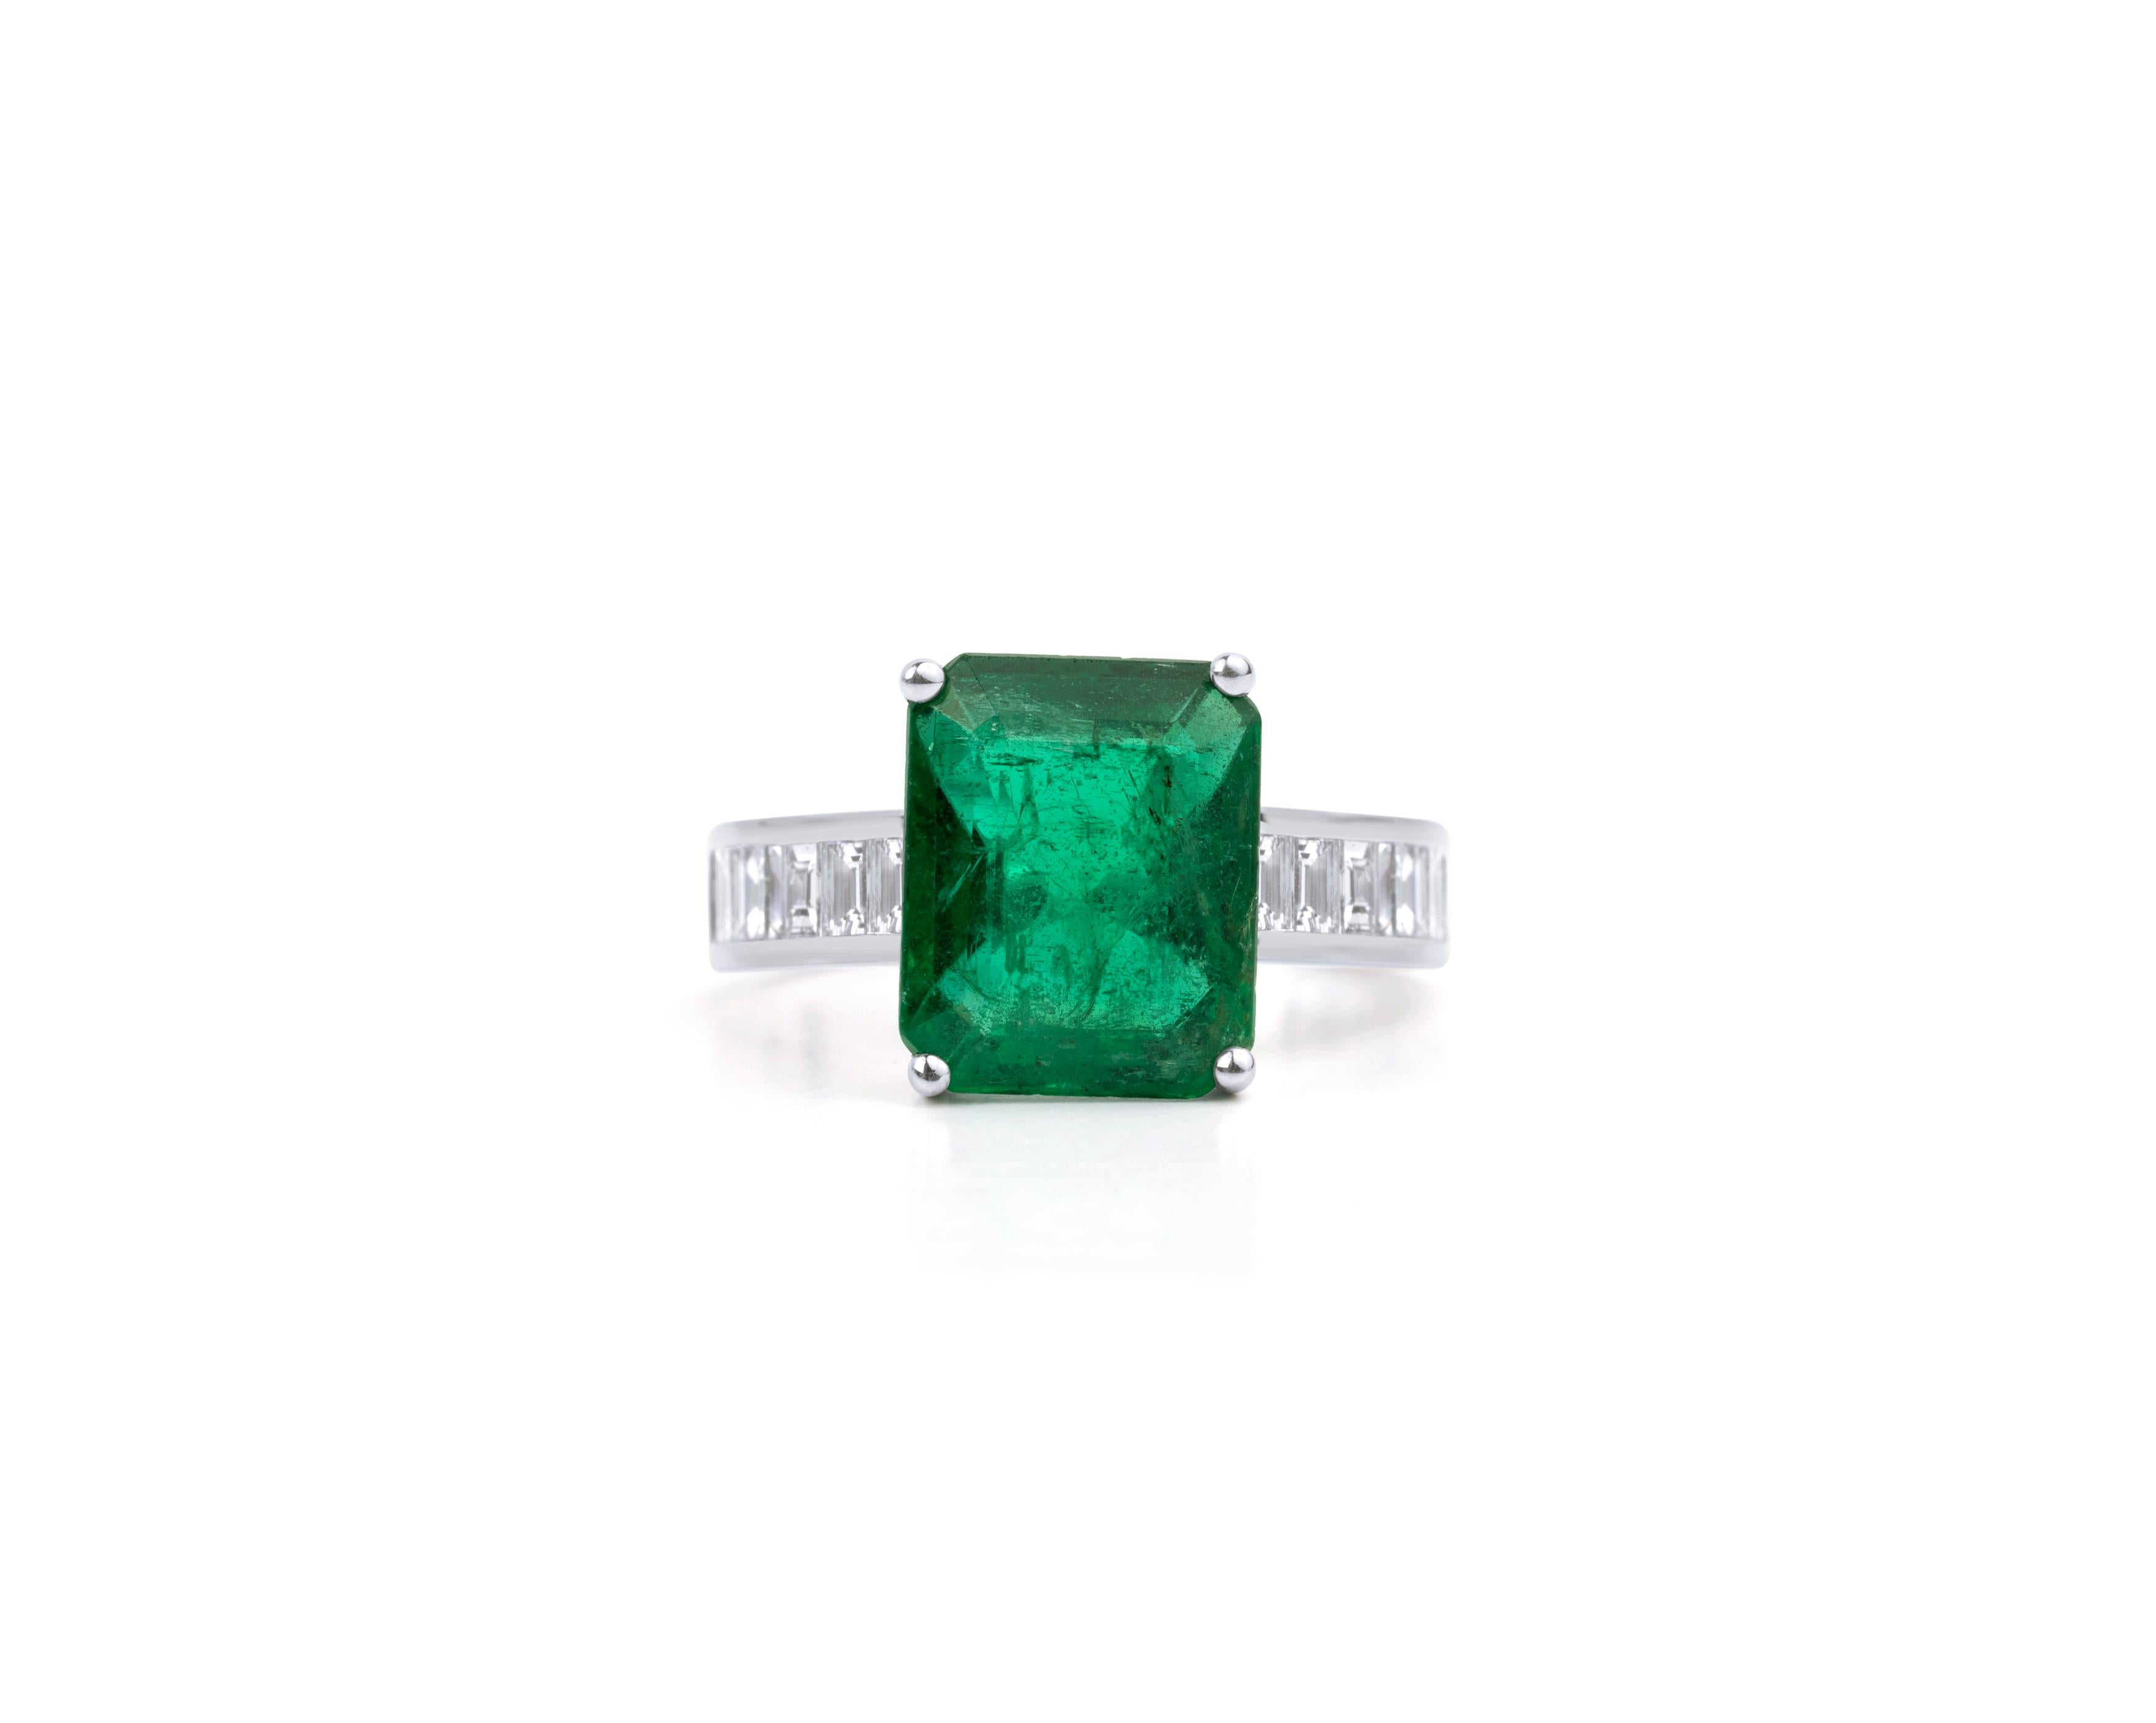 4 Carat Natural Emerald Diamond Cocktail Engagement Ring 18k White Gold

Available in 18k white gold.

Same design can be made also with other custom gemstones per request.

Product details:

- Solid gold

- Diamond - approx. 0.95 carat

- Emerald -